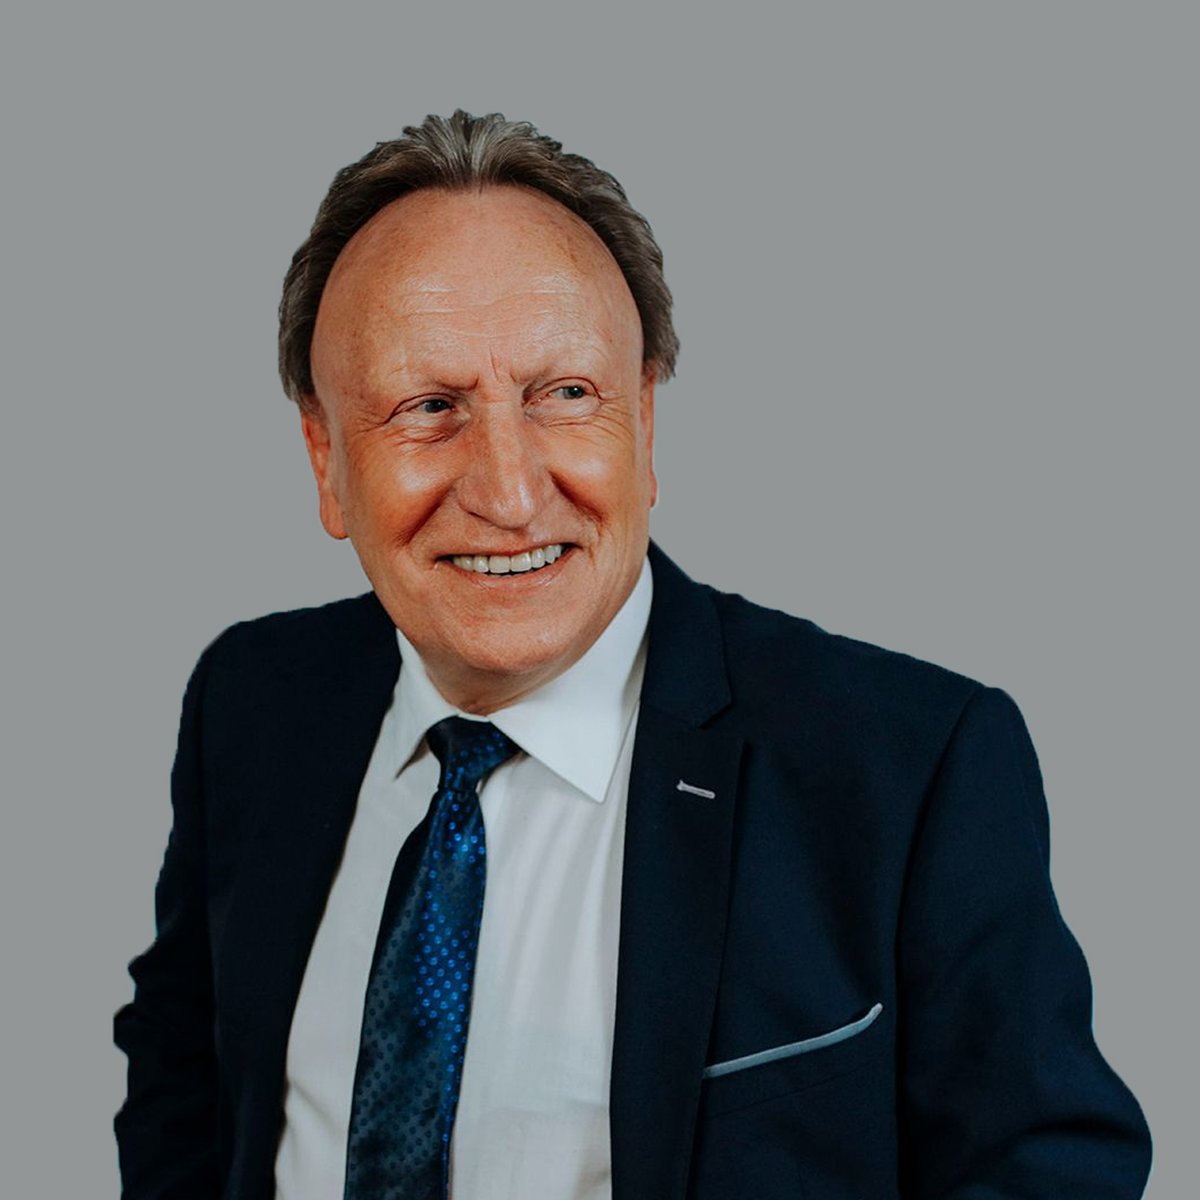 Former York City player and lauded football manager #NeilWarnock chatted to @thisisyo1 about his upcoming event on 31st May. 📻 Check it out here: yo1radio.co.uk/podcasts1/yo1-… 🎟️ Grab your tickets to his show here at @yorkbarbican: yorkbarbican.co.uk/whats-on/neil-…